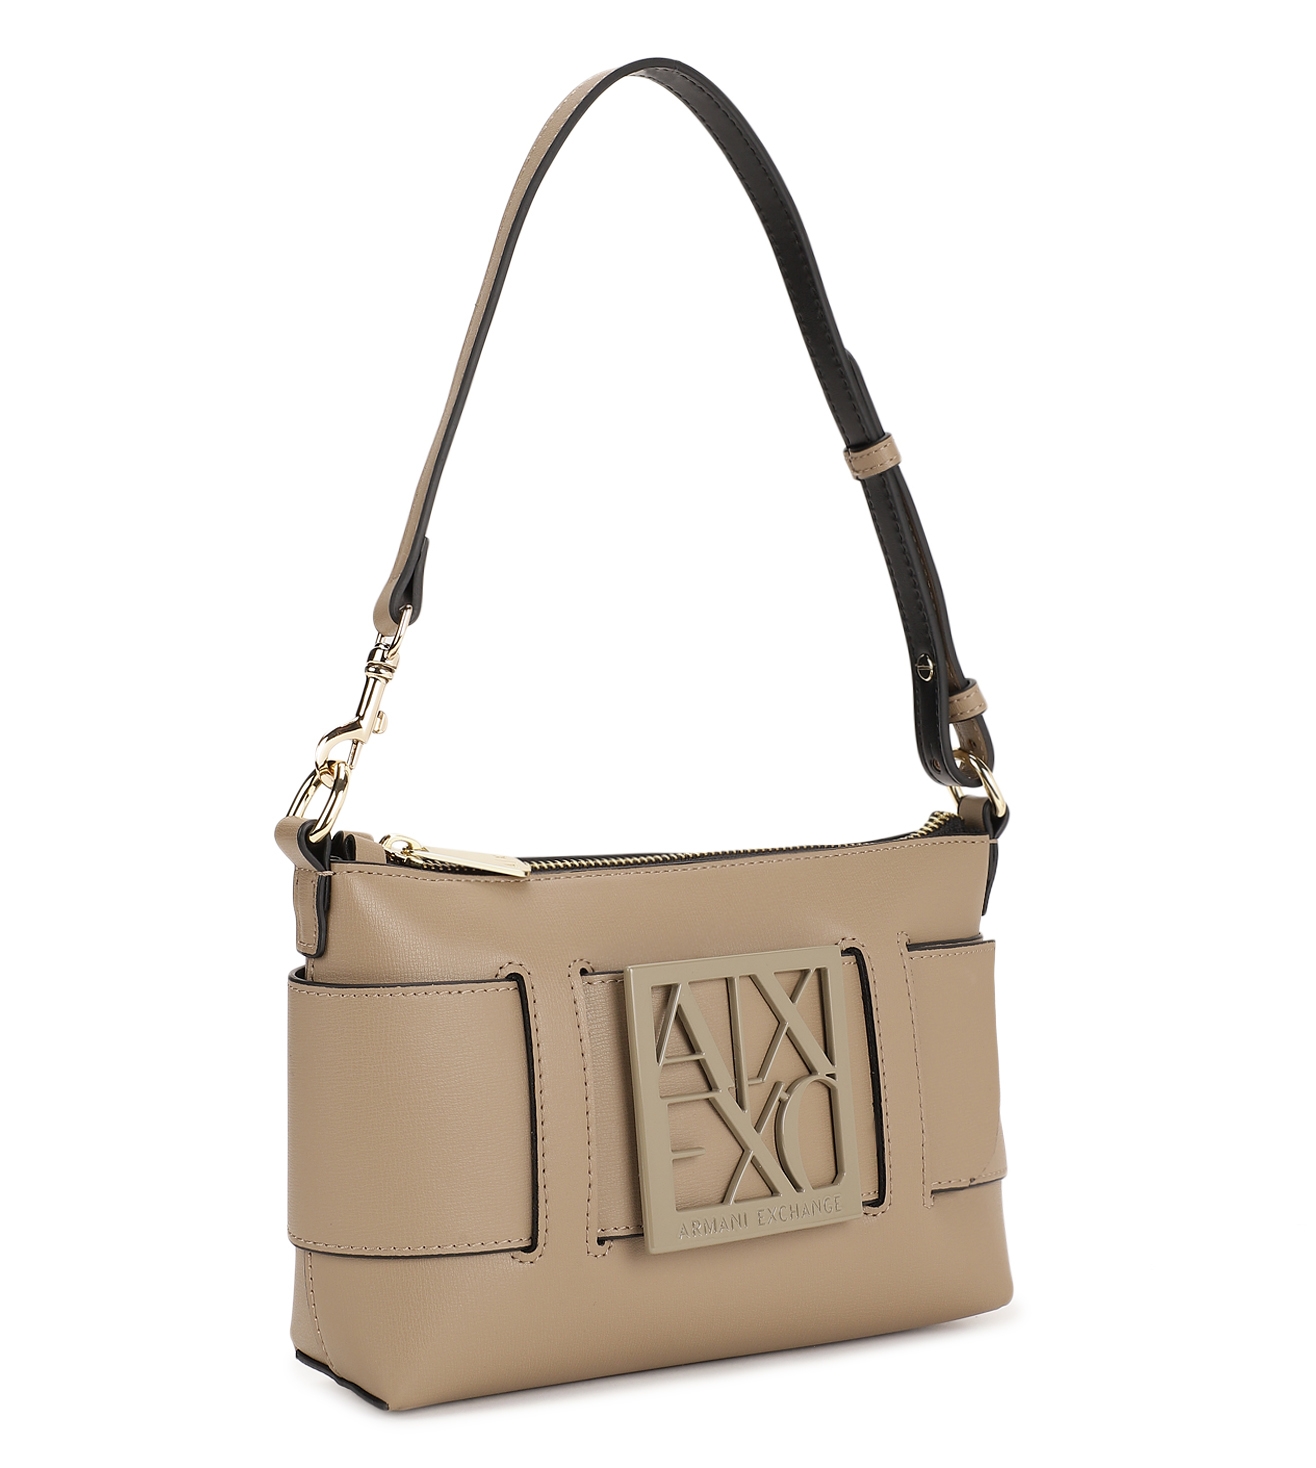 Armani Exchange Bags and Accessories